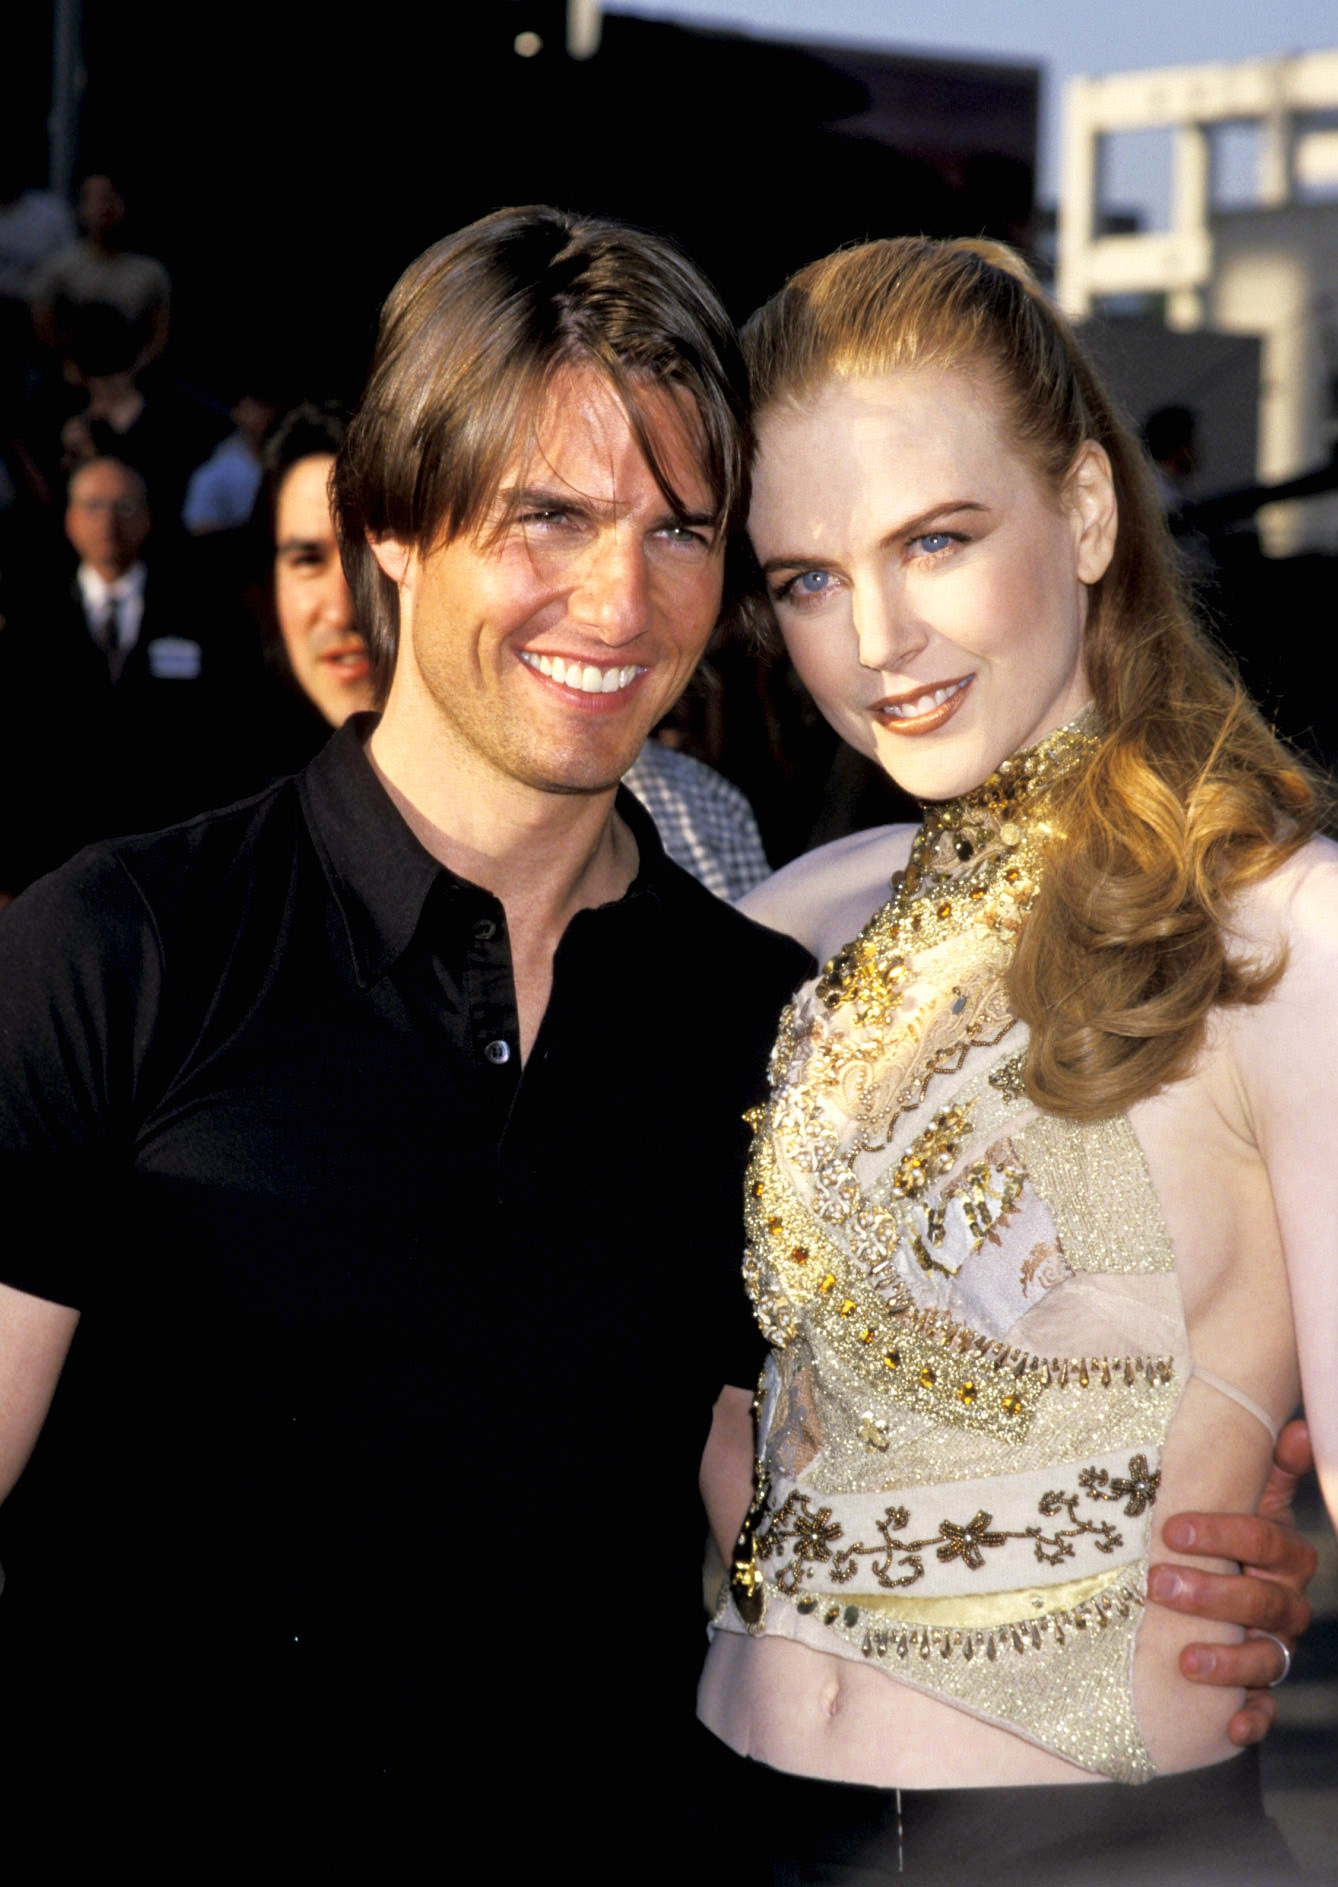 tom cruise dating now